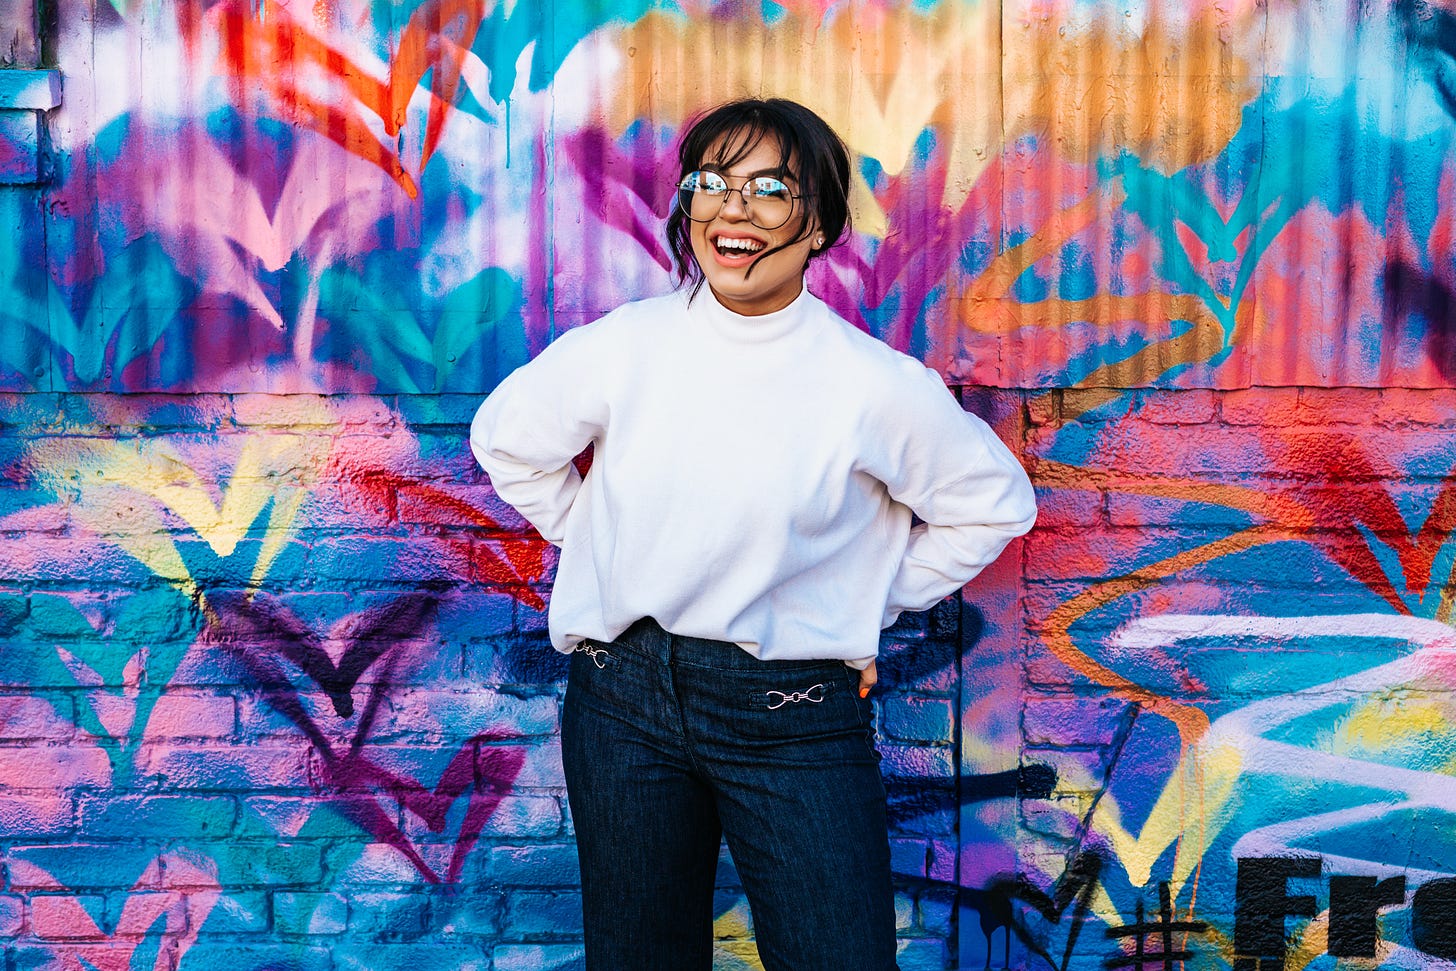 woman wearing a white sweatshirt standing in front of a colorful wall. She is smiling and wearing glasses.